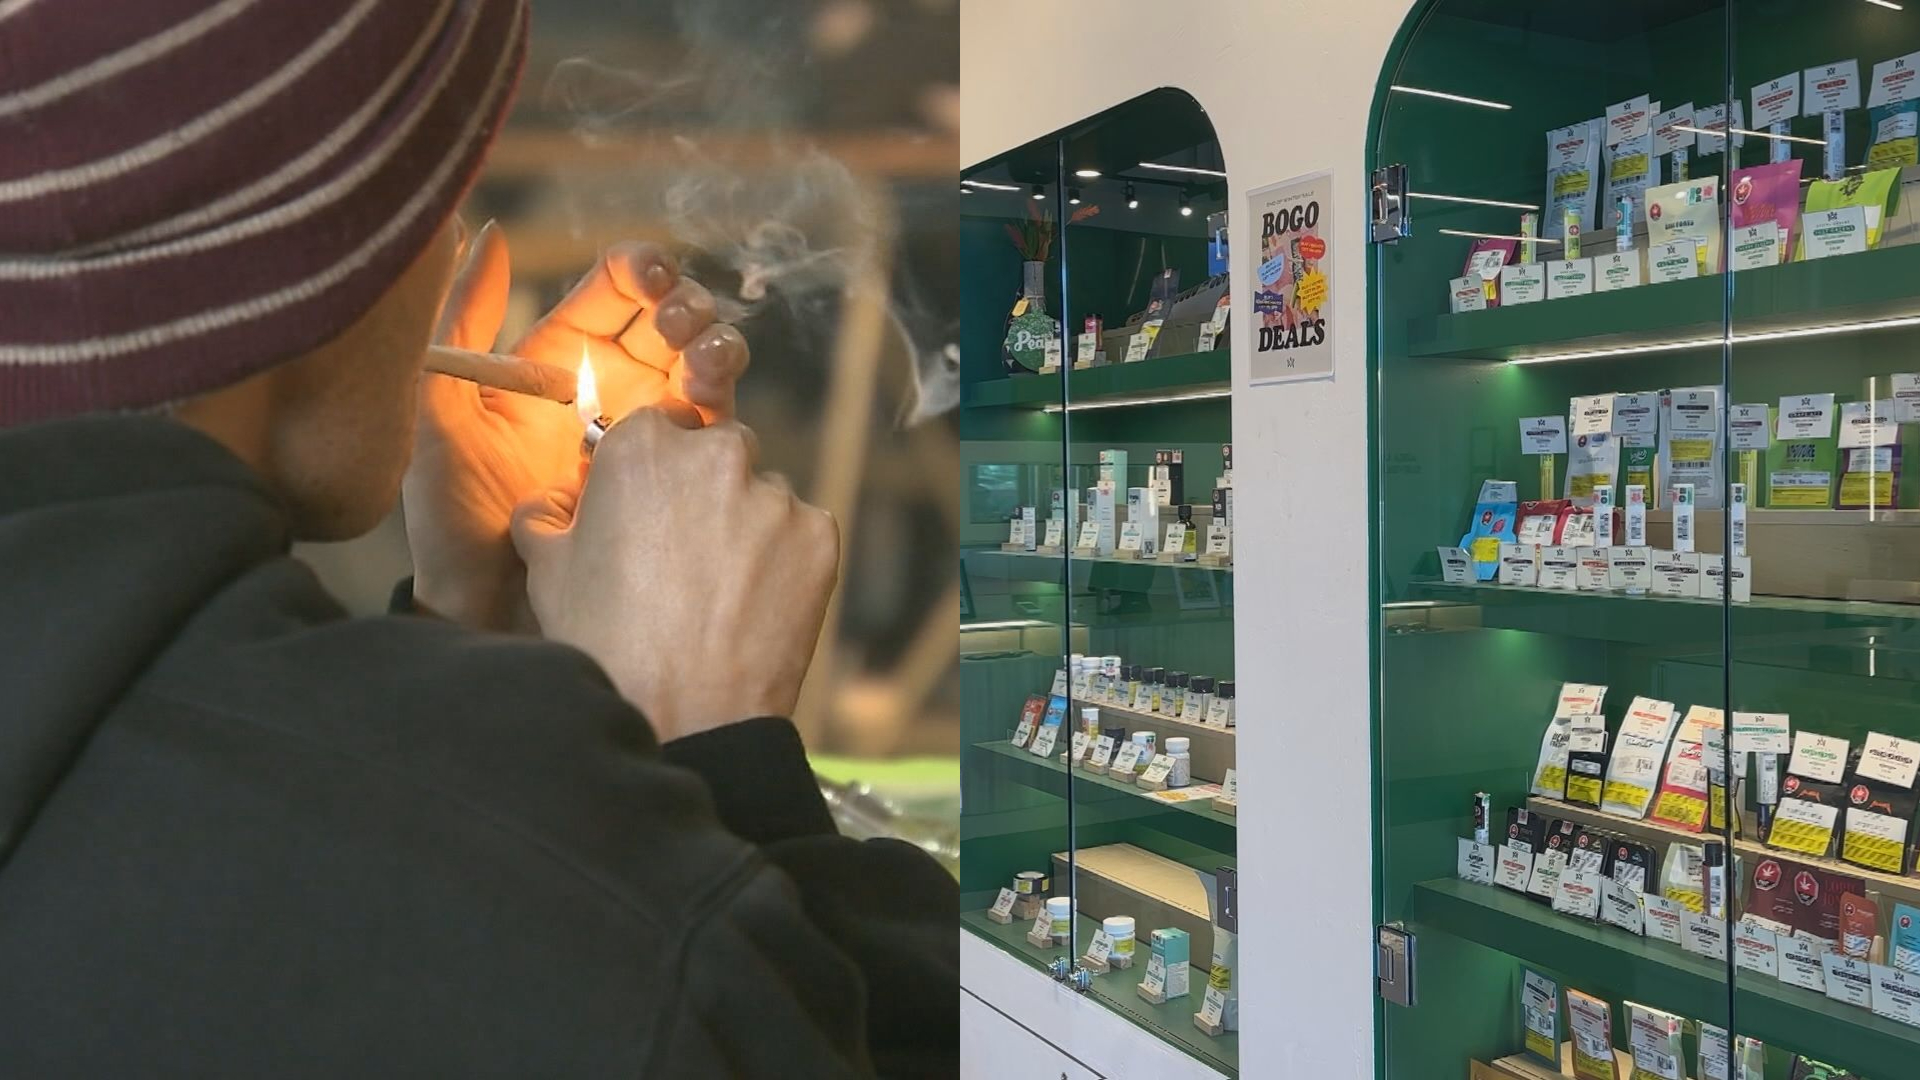 Surrey will soon start accepting applications for cannabis stores